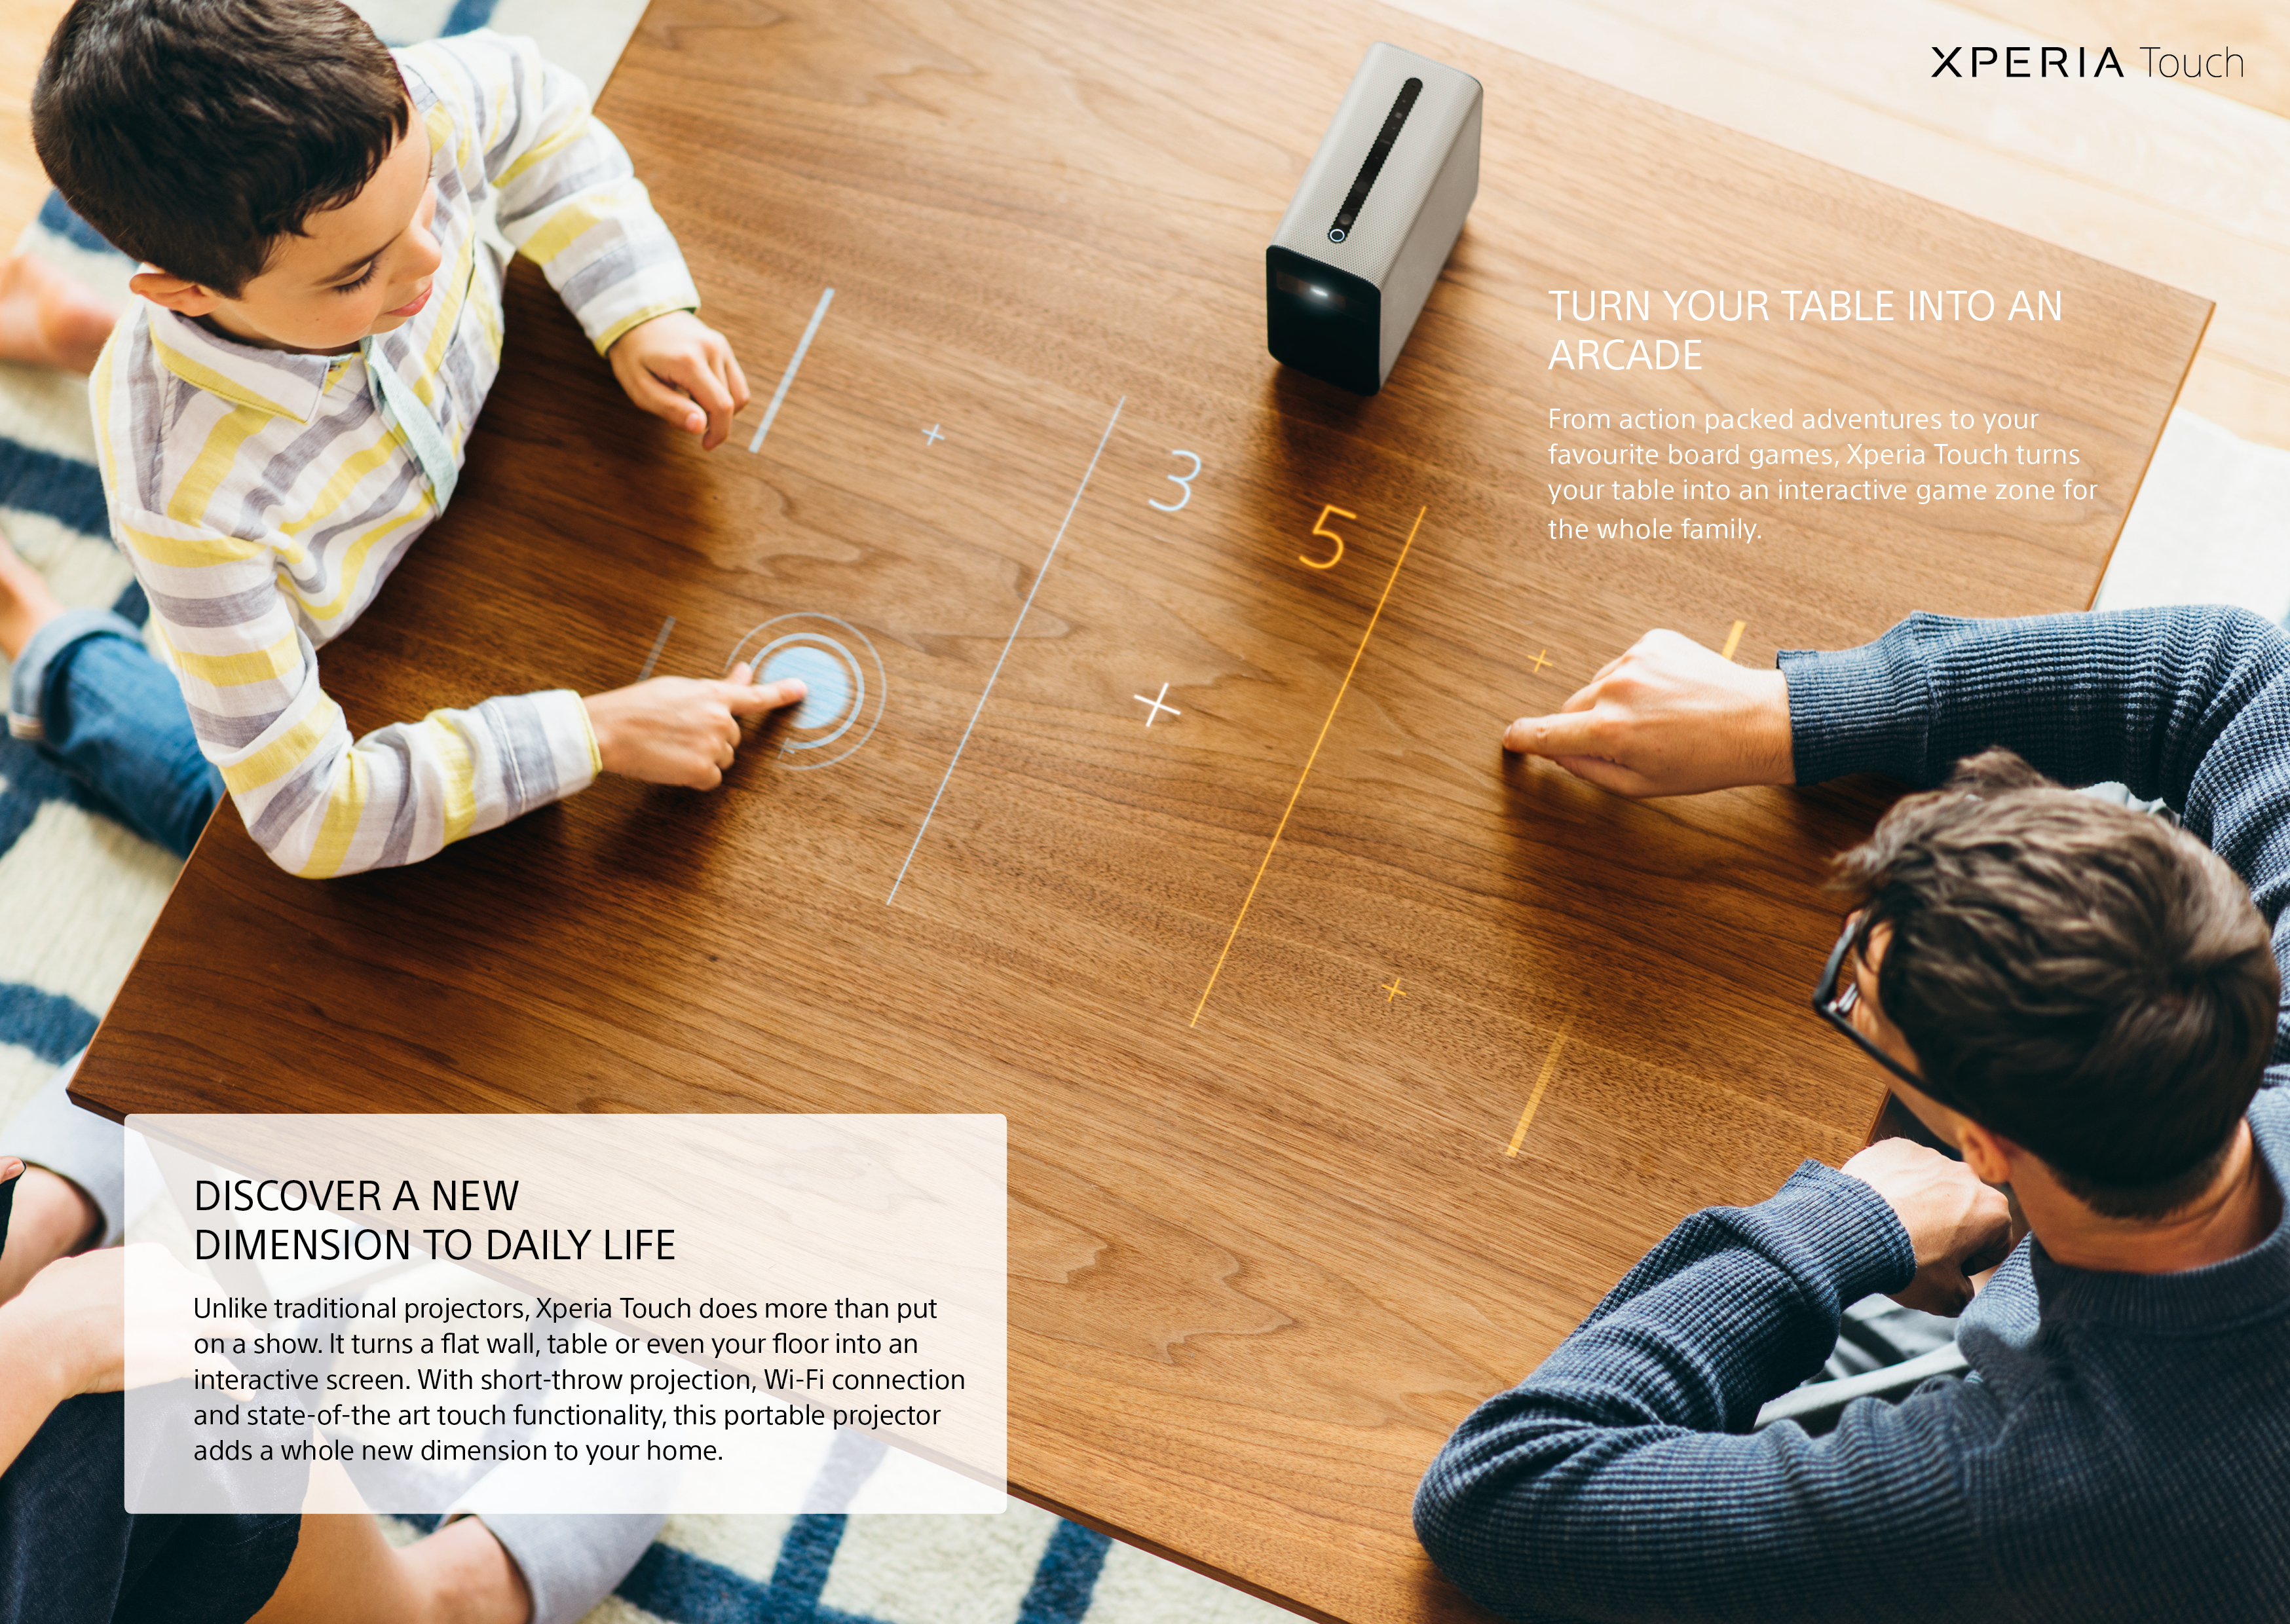 Xperia touch spread by adentity Family playing games on table